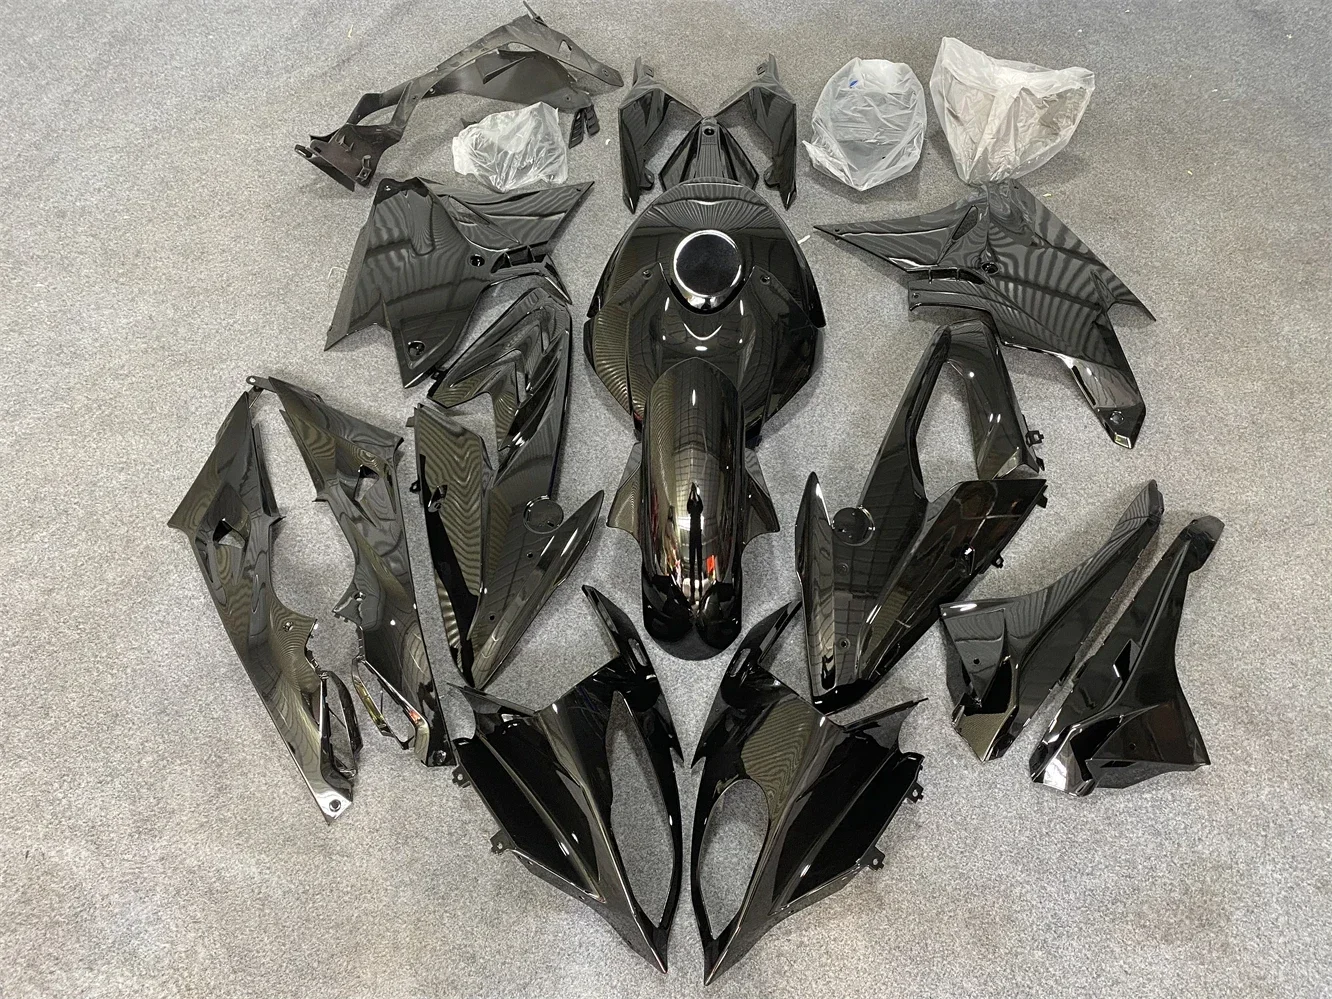 

Motorcycle Fairing Set Body Kit Plastic For S1000 S1000RR S1000 RR 2017 2018 Accessories Injection Bodywork Cowl Cover Body